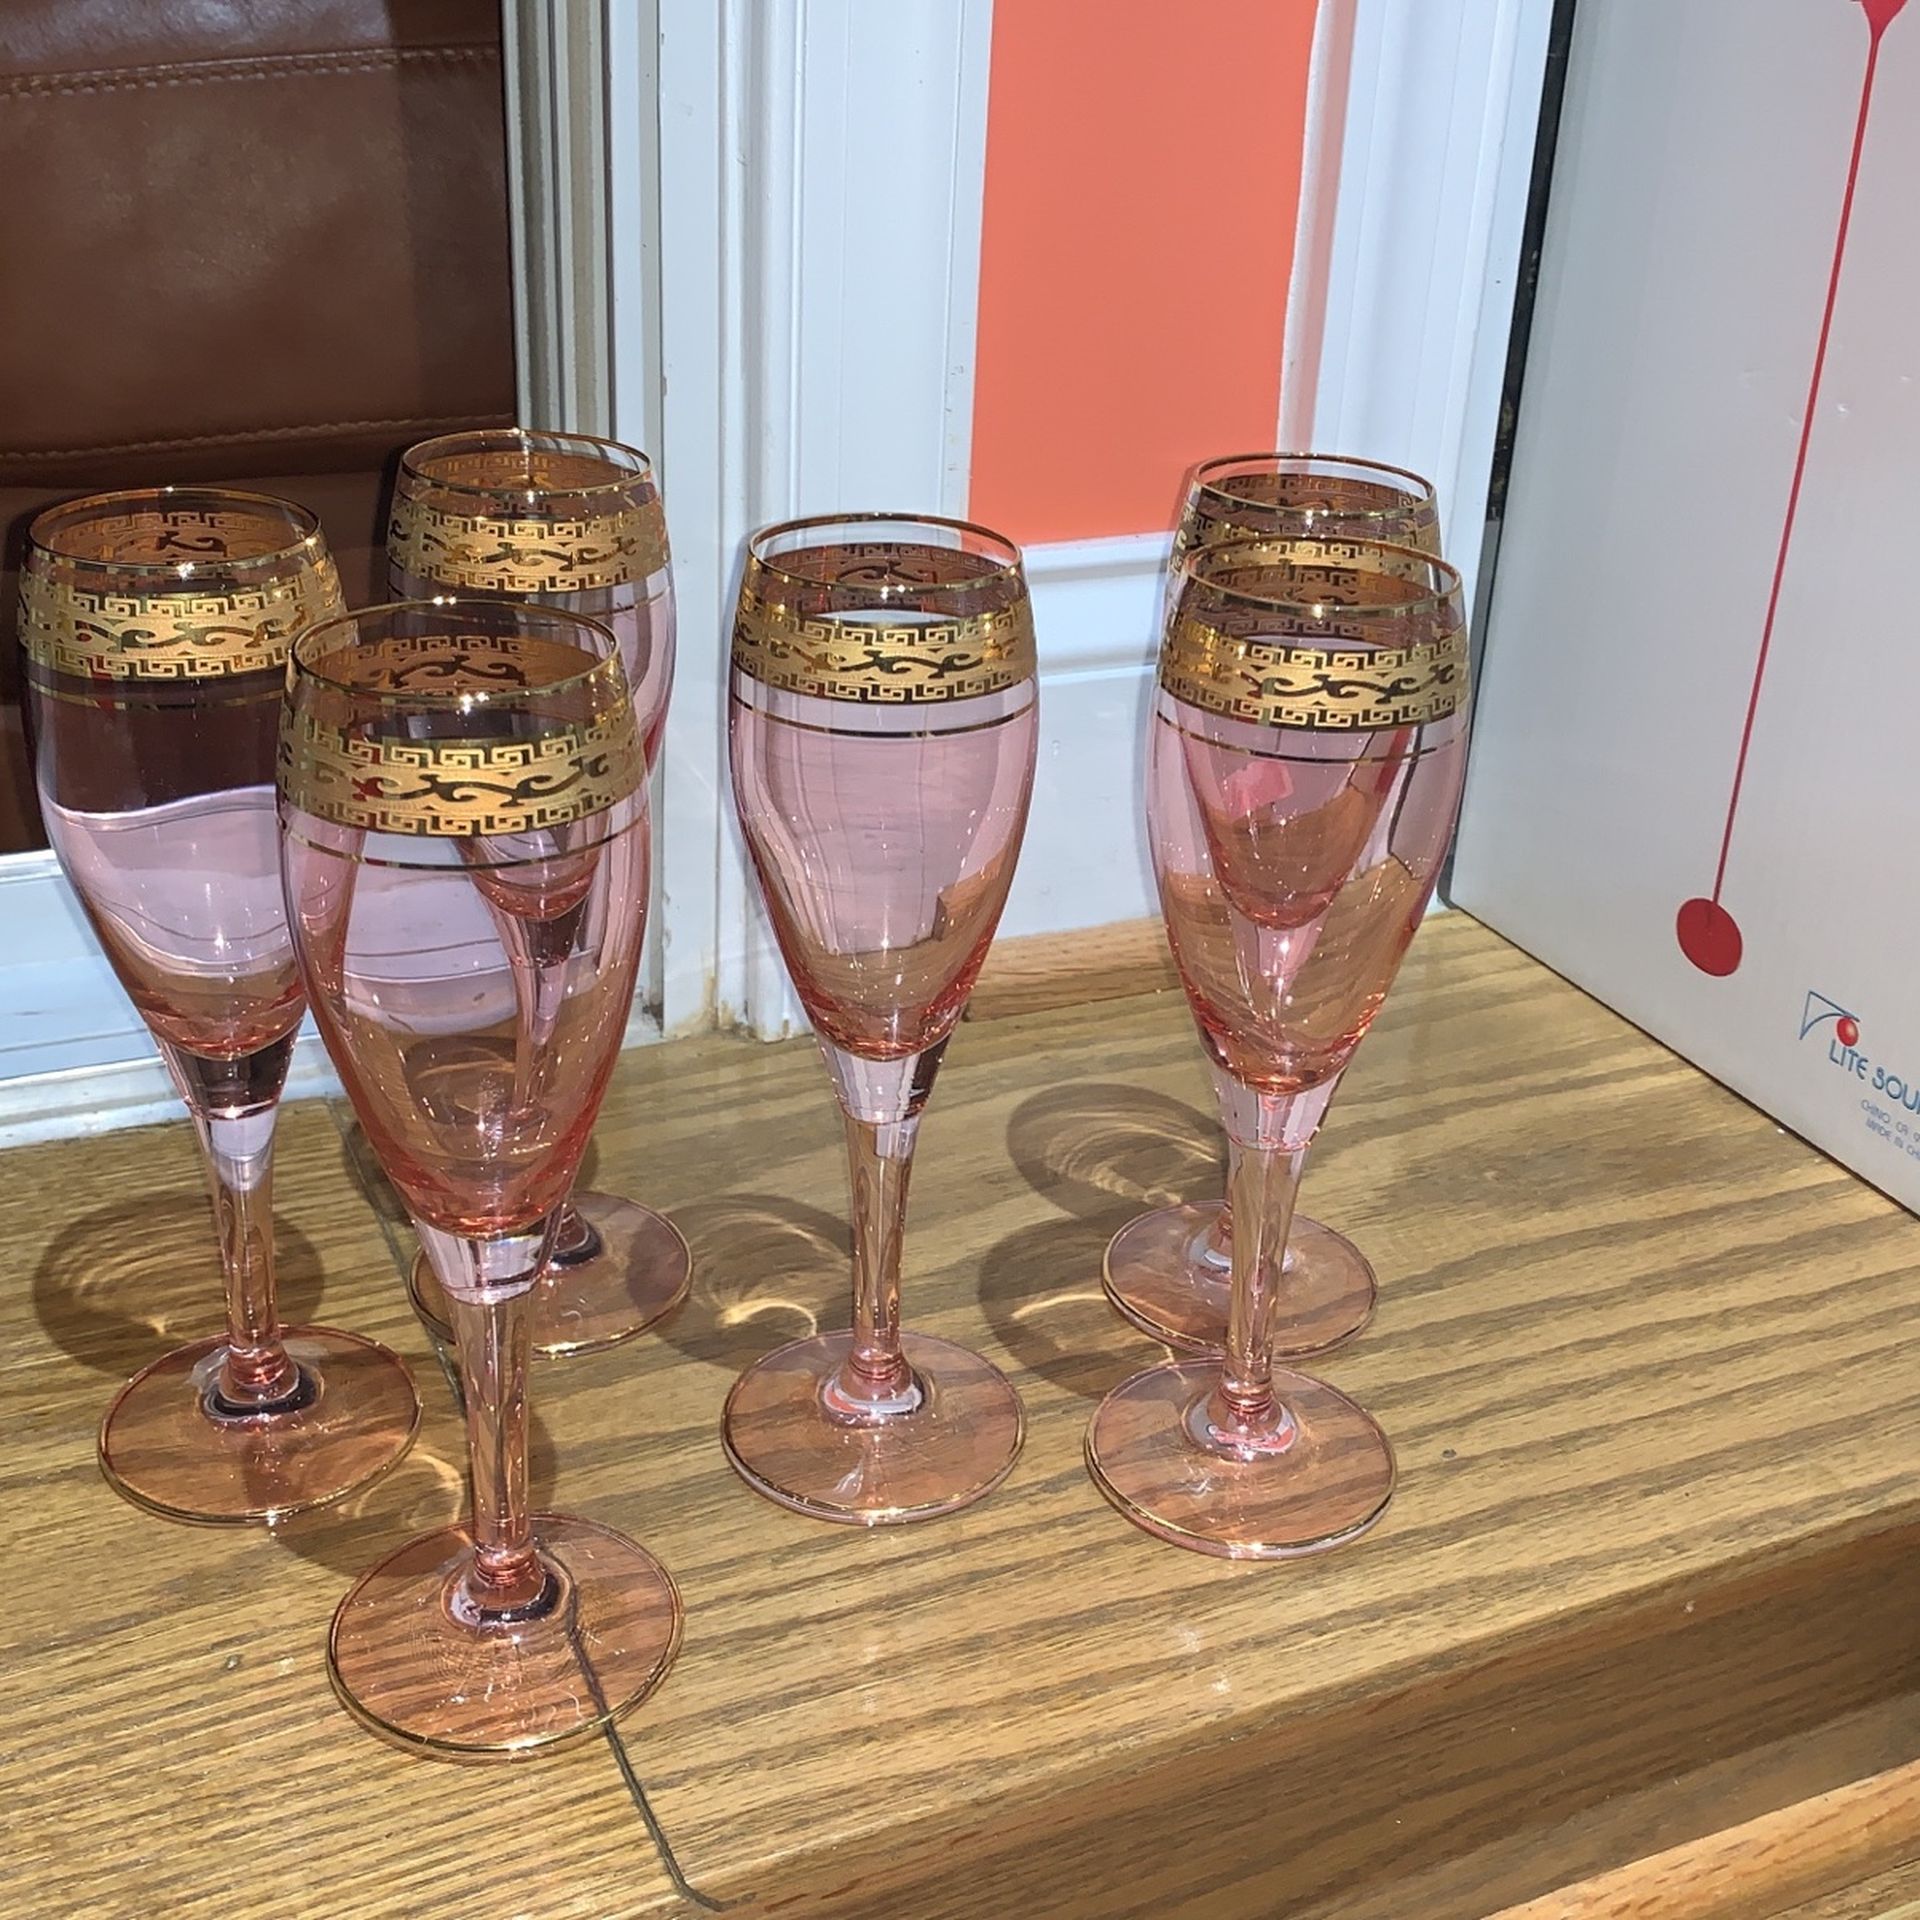 New In Box Champagne Flutes, 6pcs